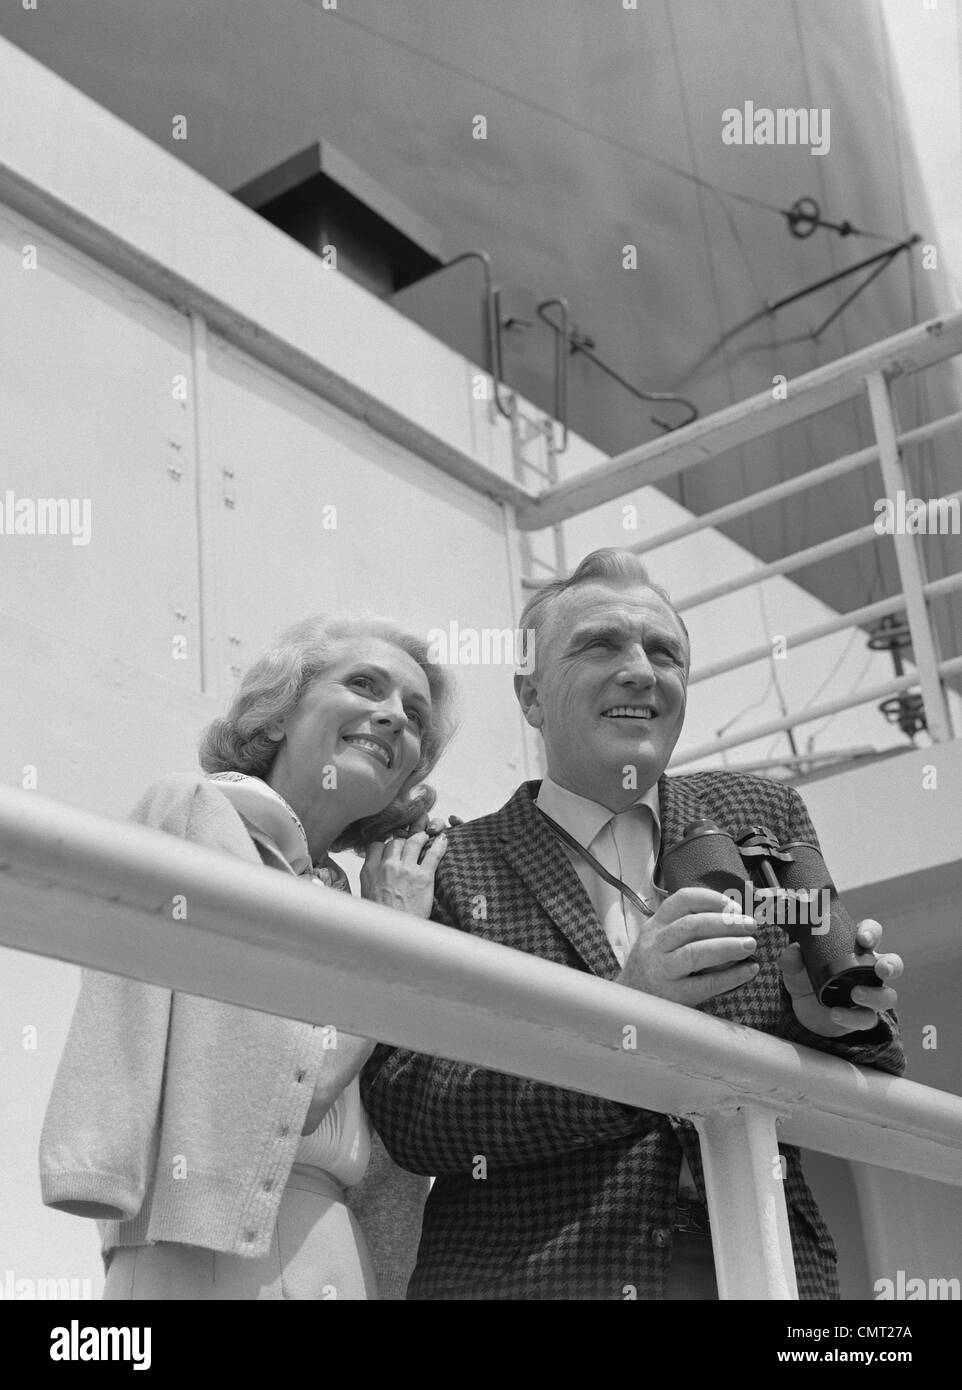 1960s SMILING MATURE COUPLE AT SHIPBOARD RAIL WITH BINOCULARS Stock Photo